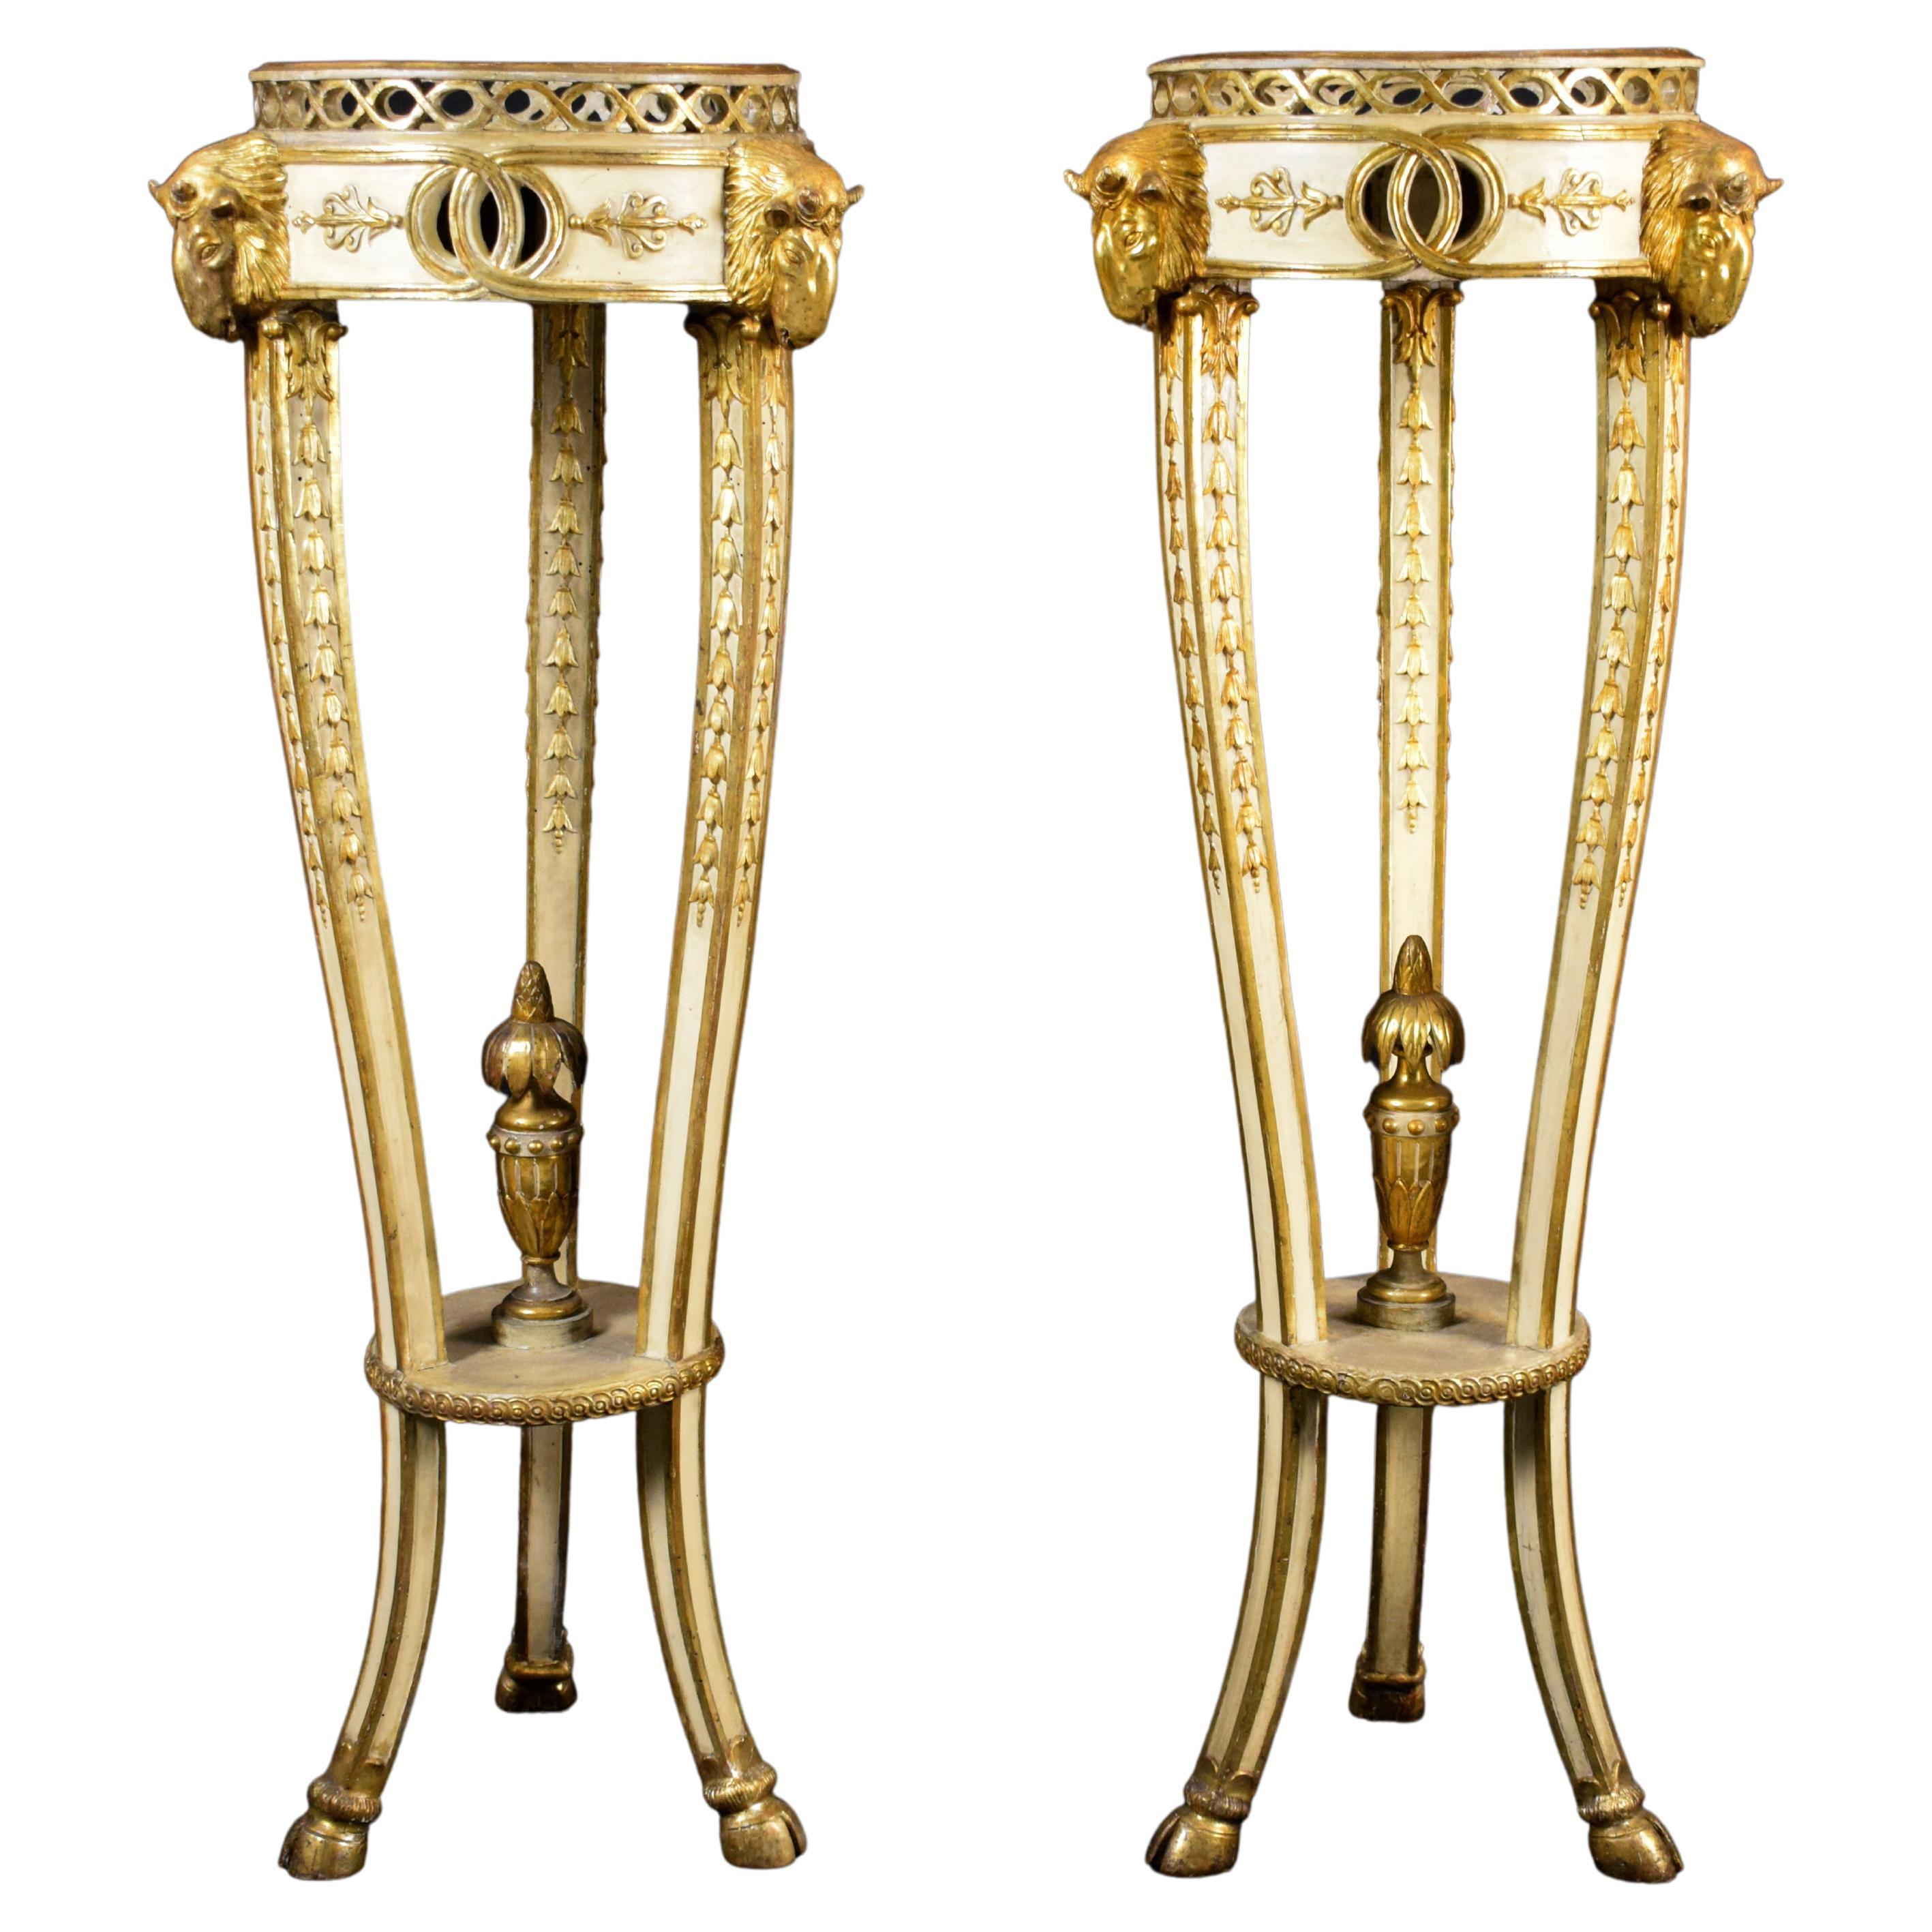 18th Century, Pair of Italian Neoclassical Lacquered and Giltwood Gueridon